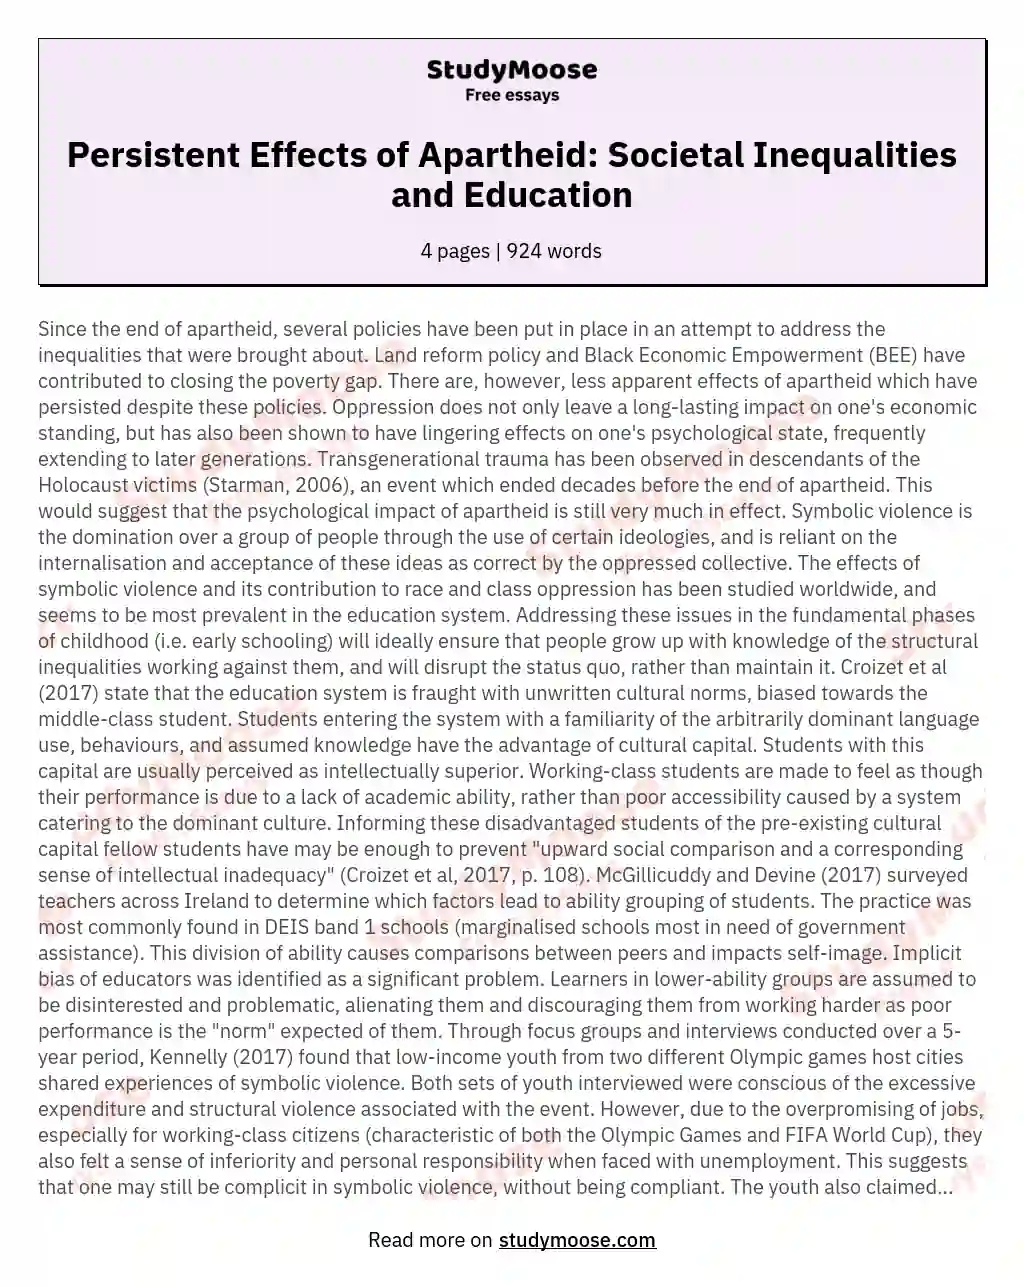 essay about the apartheid